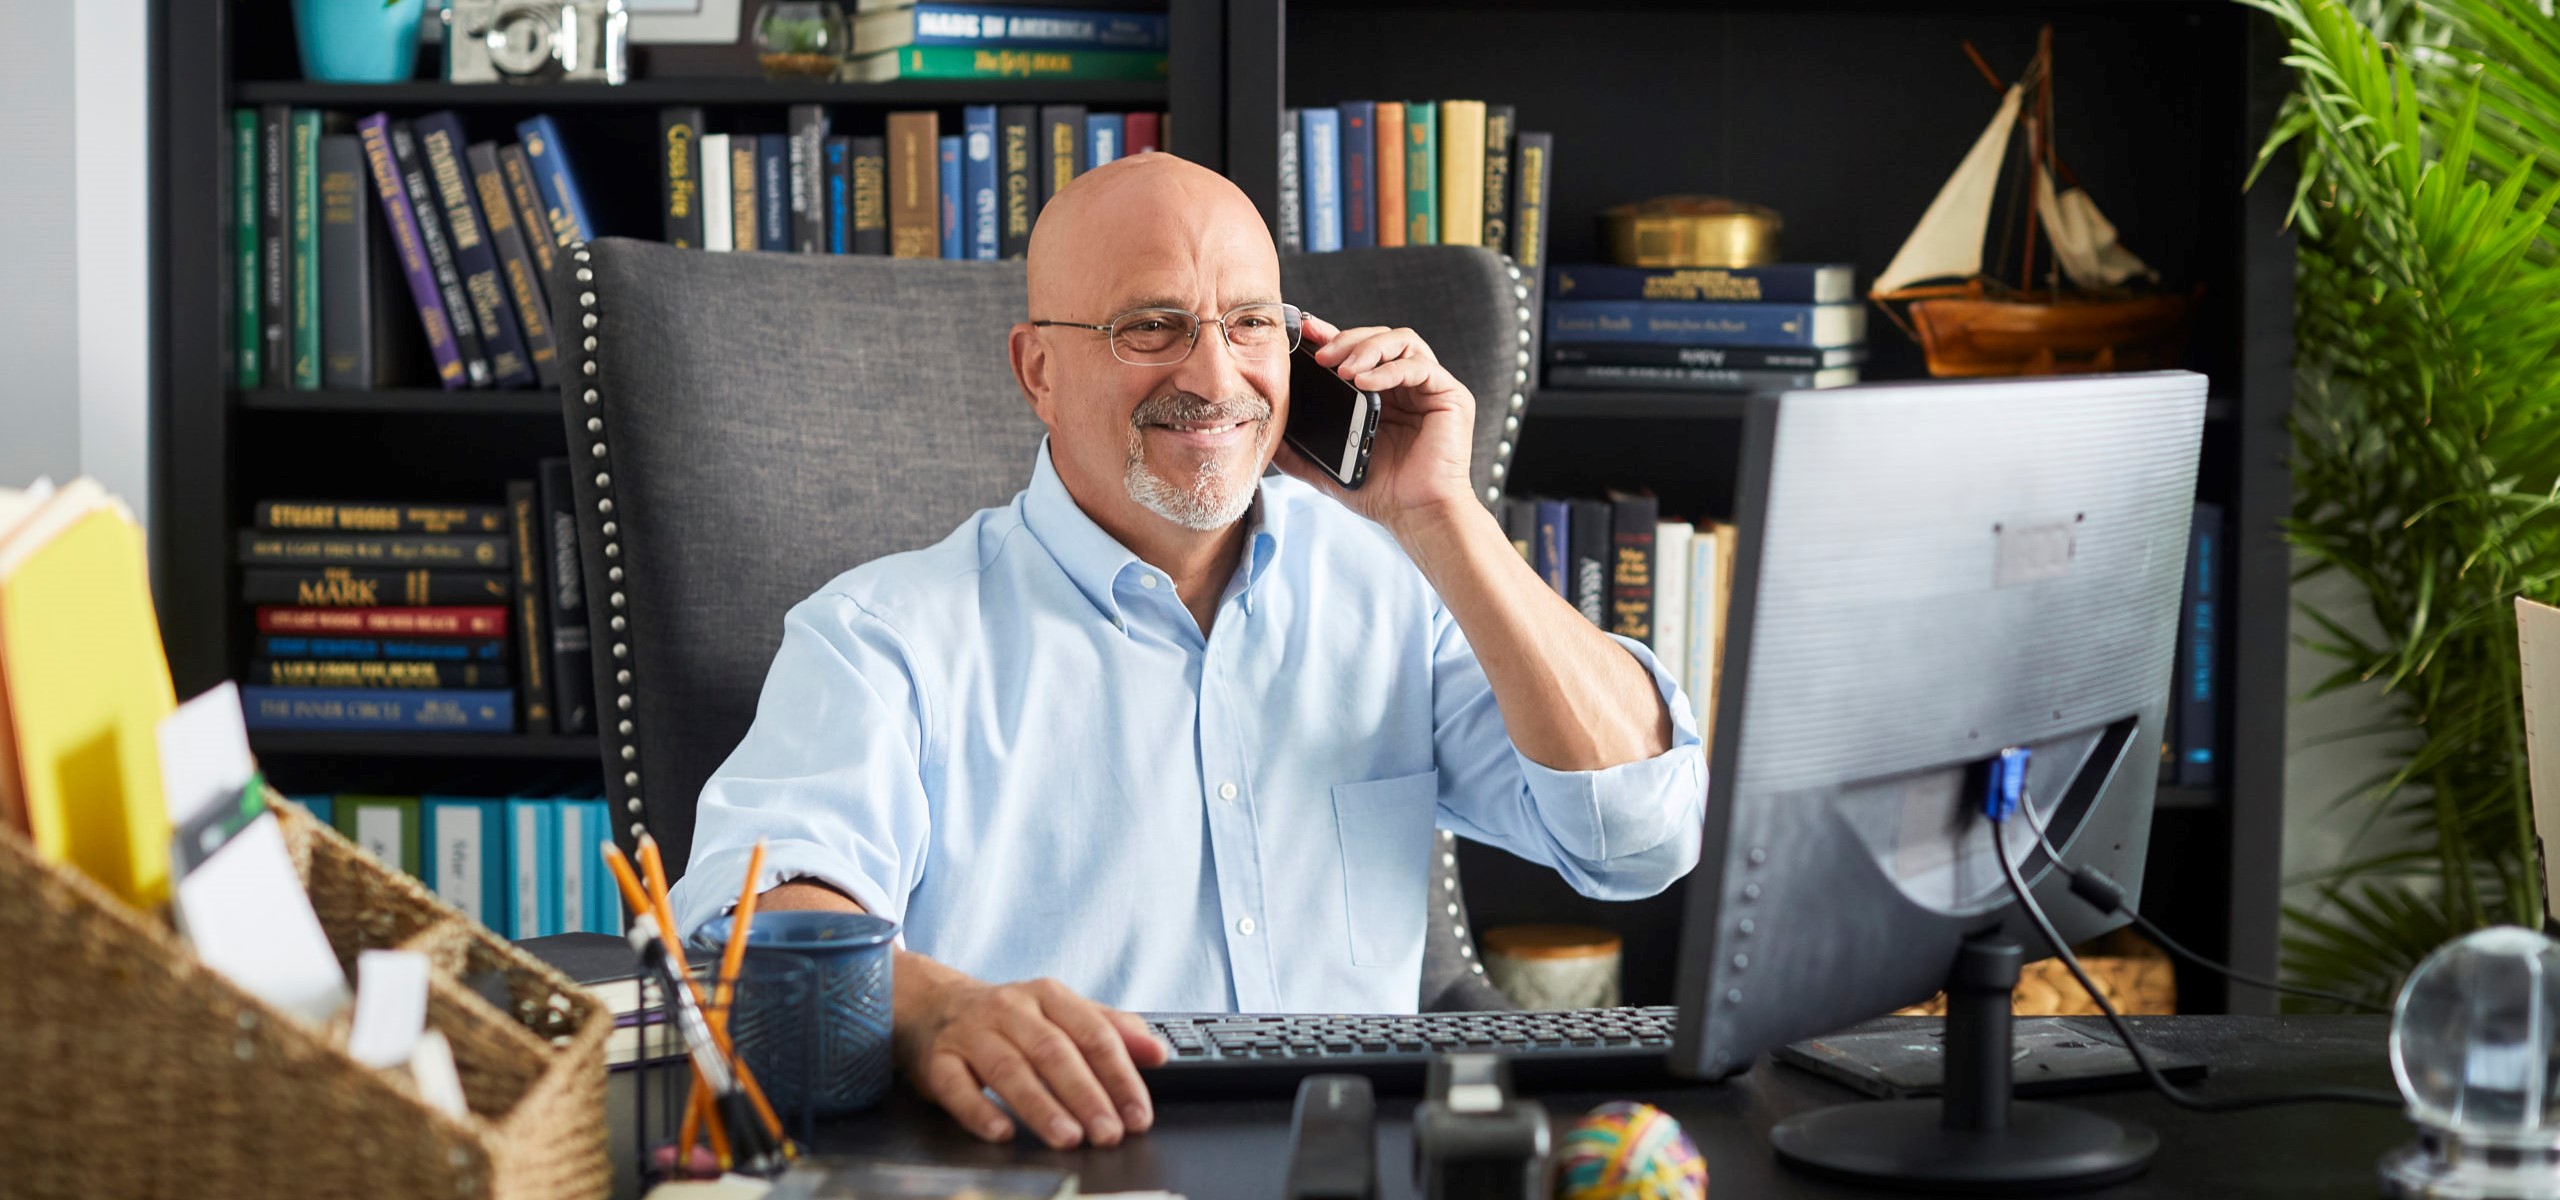 Man in his 60s smiling takes a phone call in front of his computer monitor